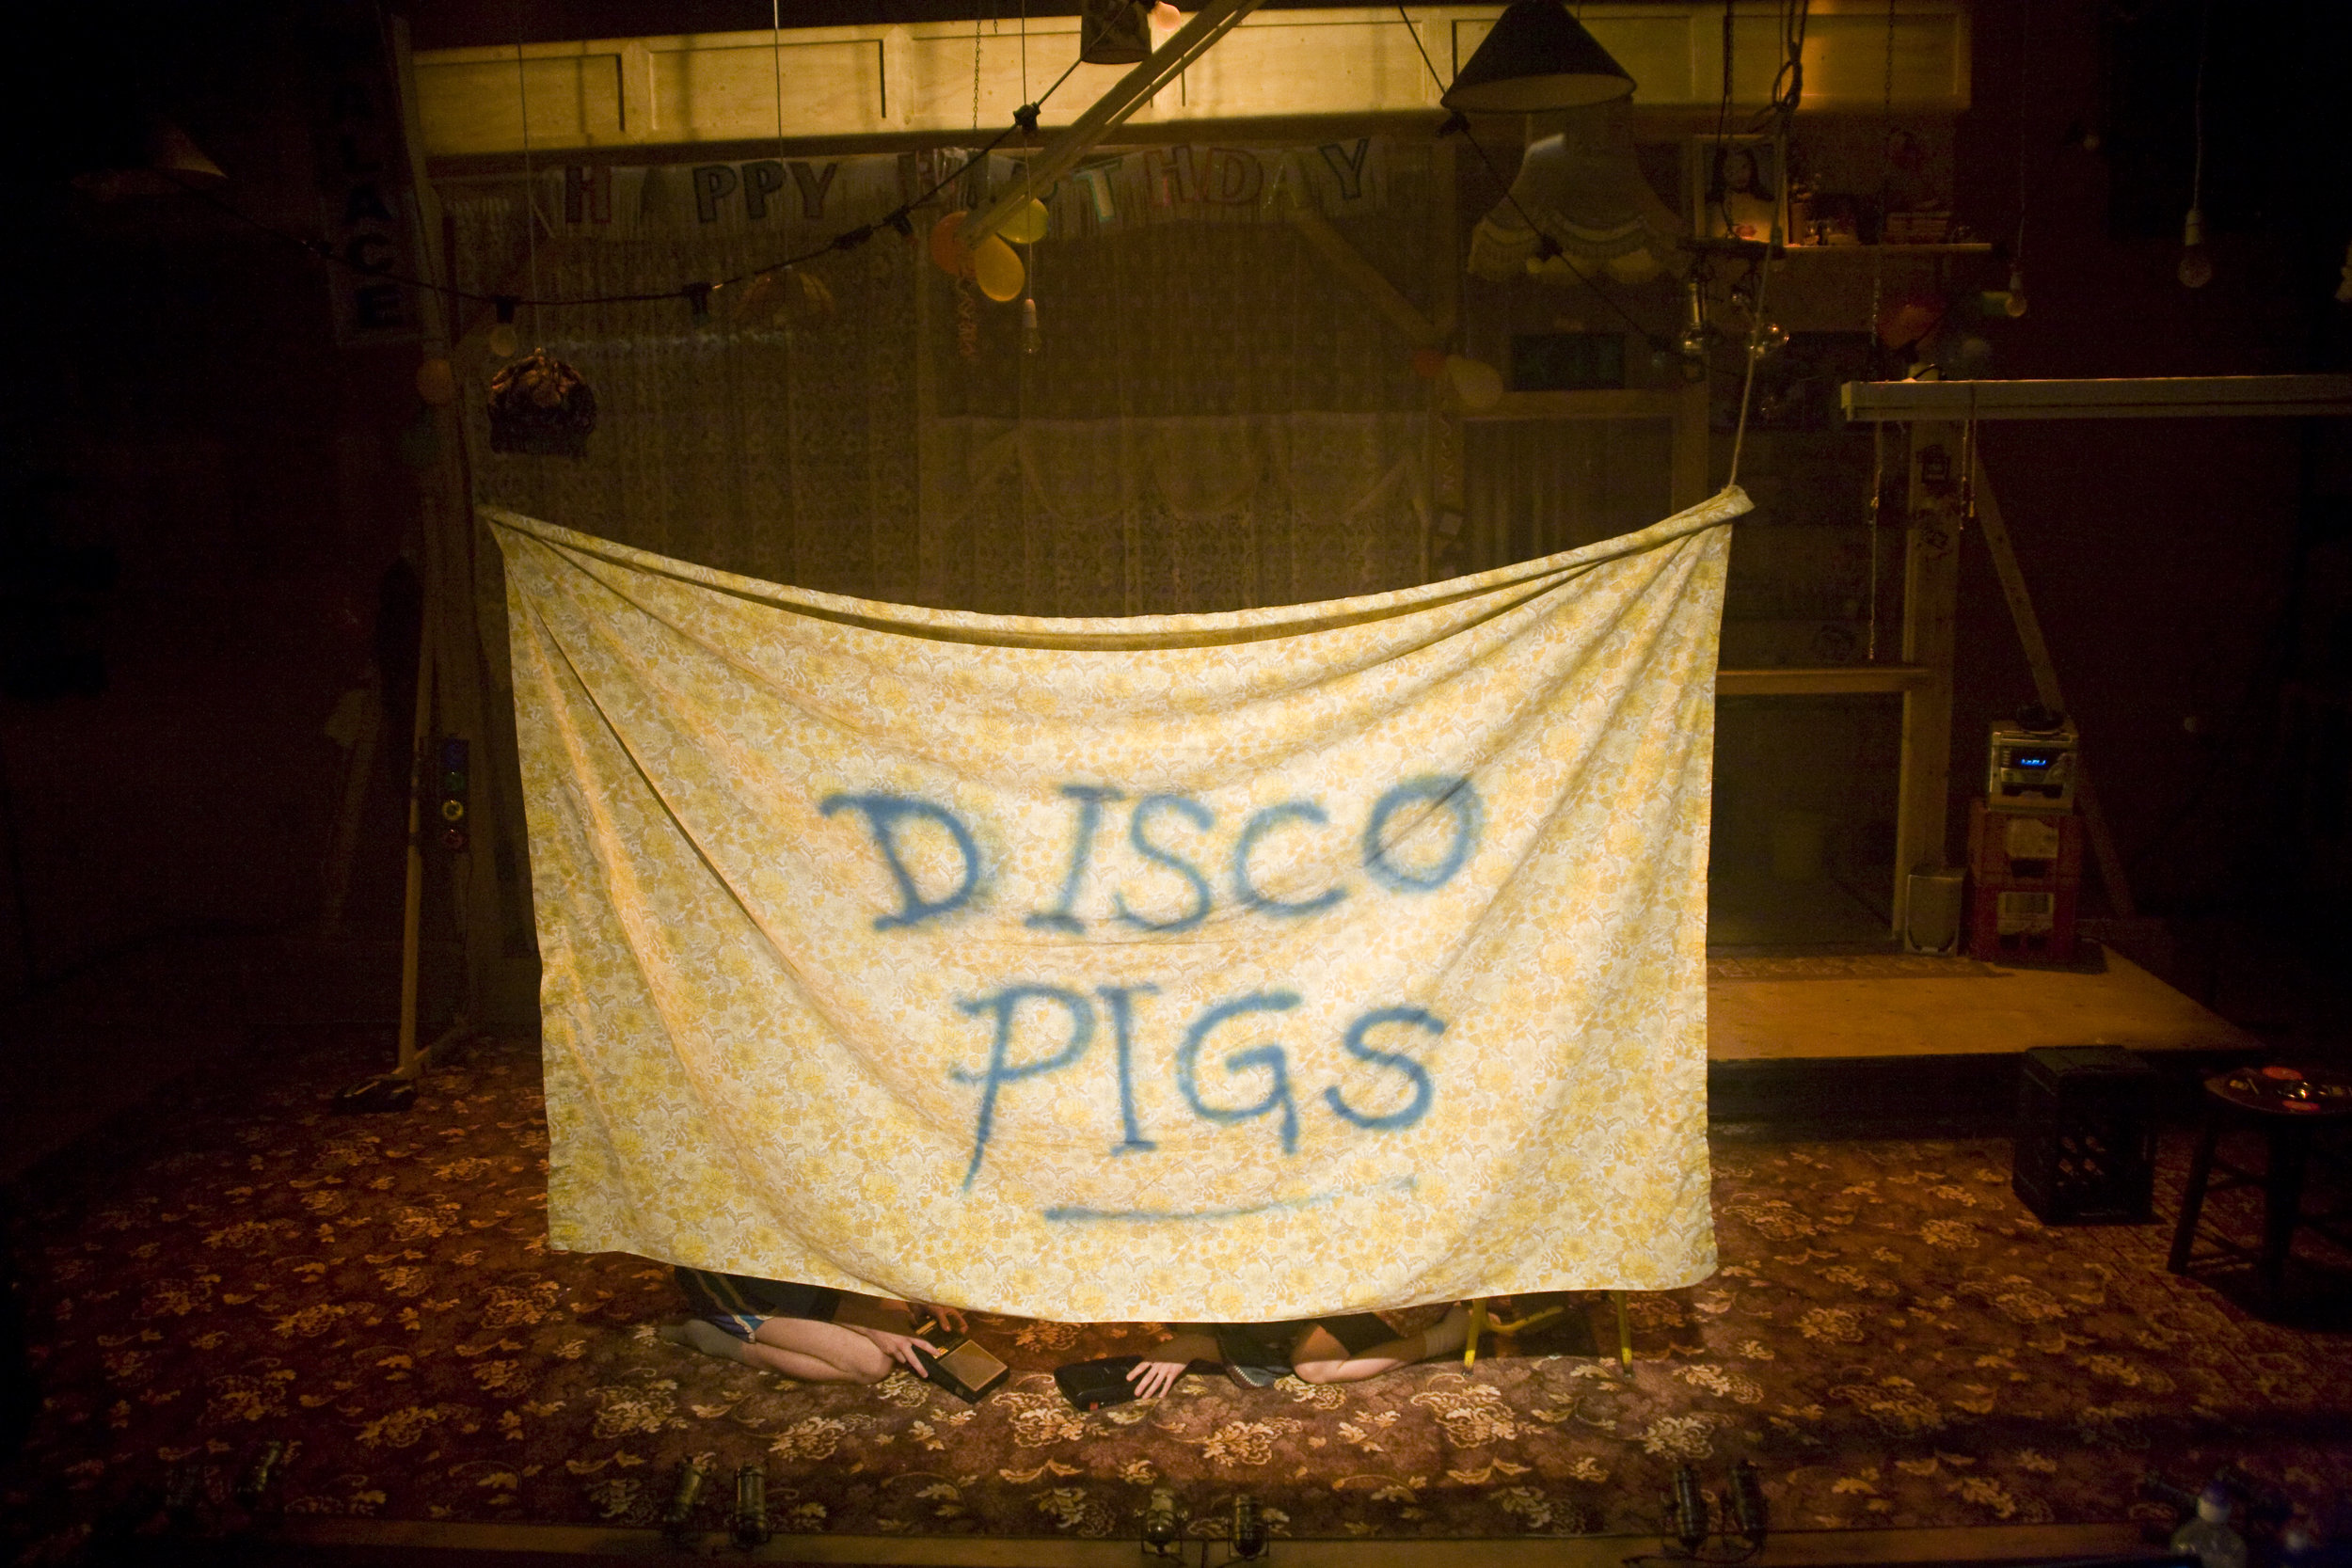   Disco Pigs /  Young Vic / September 2011   JMK DIRECTORS’ AWARD WINNER   Written by  Enda Walsh   Designed by  Chloe Lamford   Lighting by  Anna Watson   Sound by  Tom Gibbons   Assistant Director  Ola Ince   Produced by  Ros Terry   Cast  Charlie 